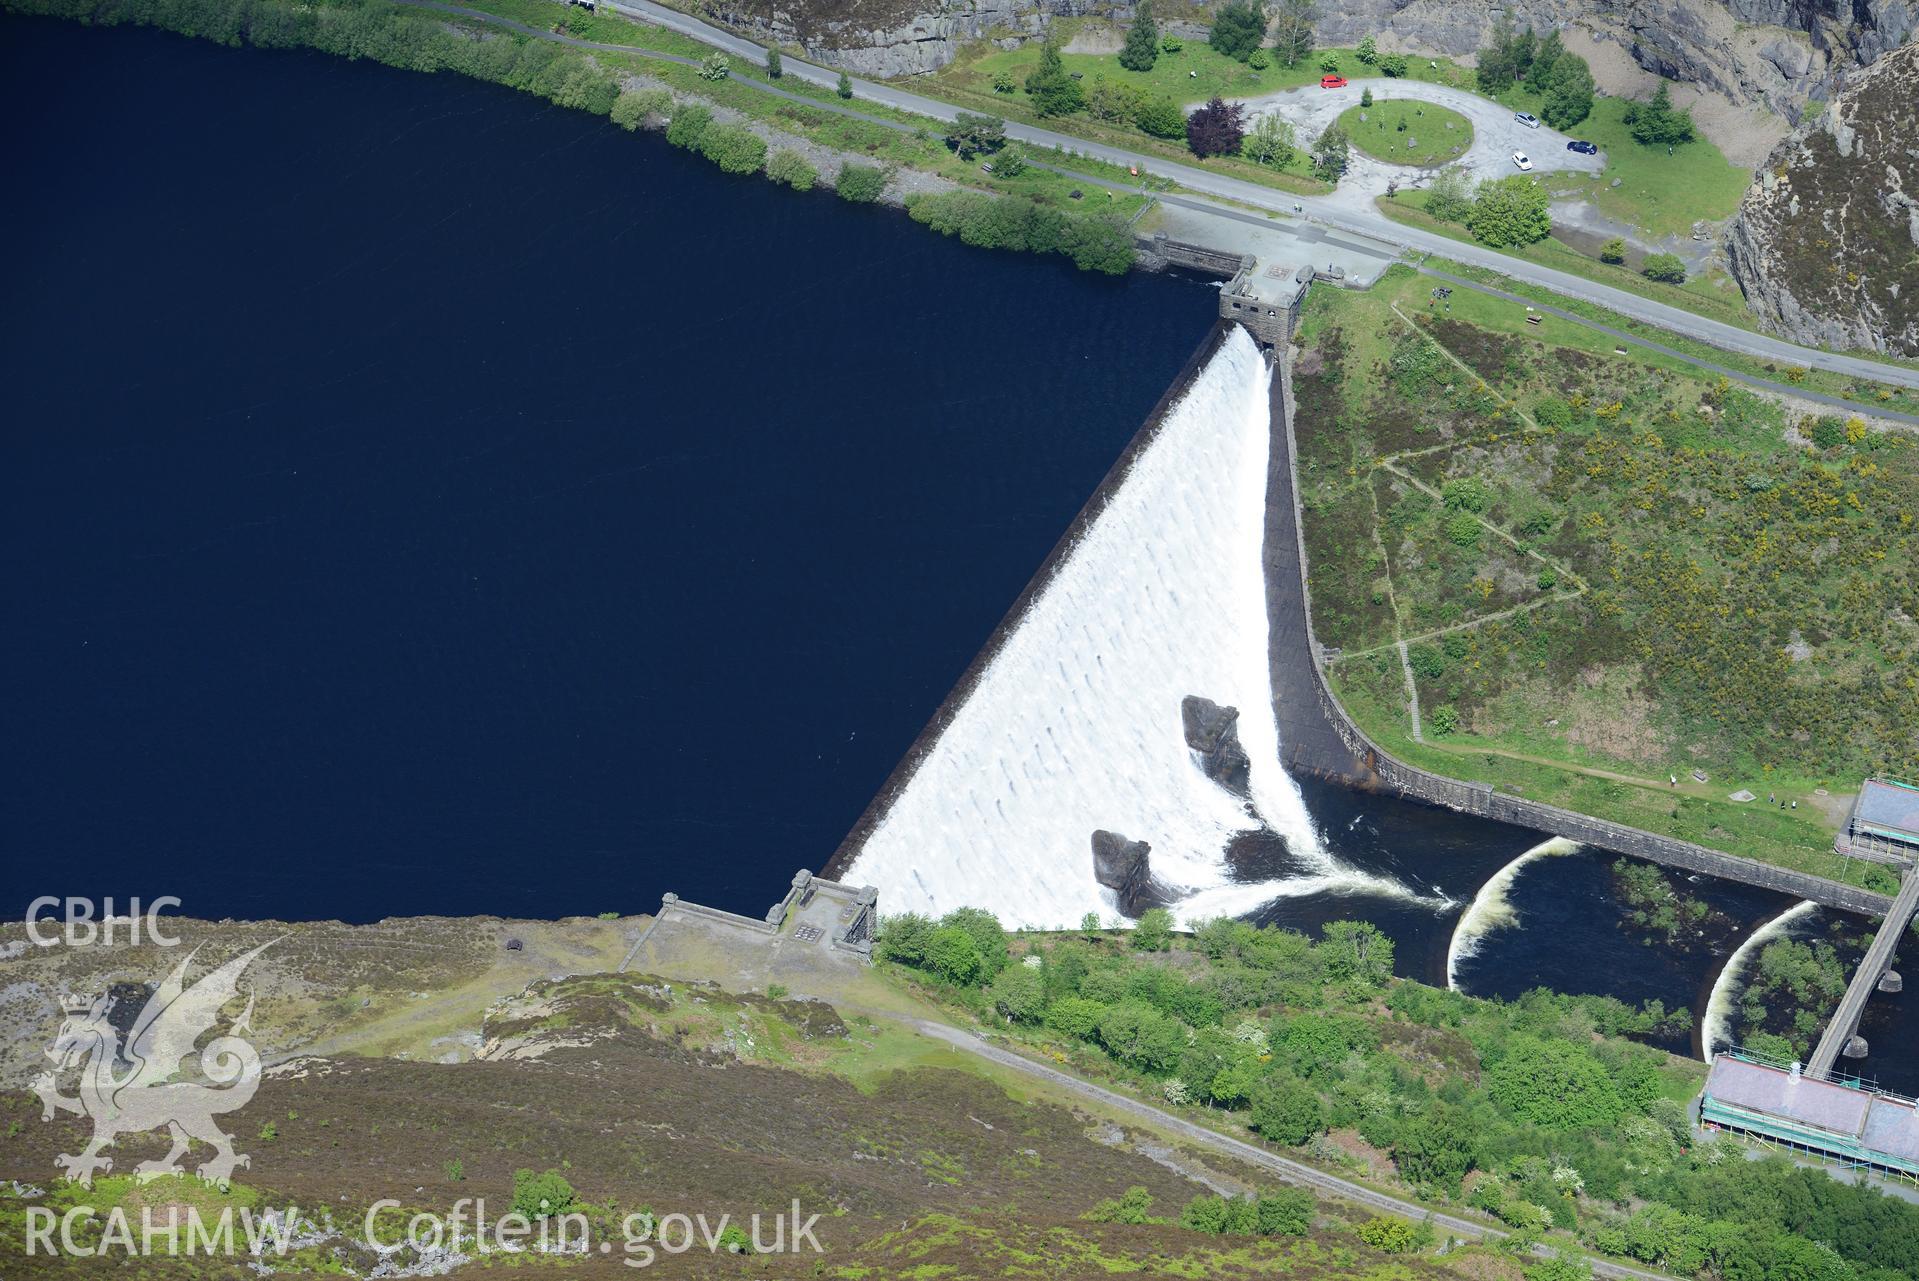 Caban Coch reservoir; dam and hydro electric station, Elan Valley Water Scheme. Oblique aerial photograph taken during the Royal Commission's programme of archaeological aerial reconnaissance by Toby Driver on 3rd June 2015.